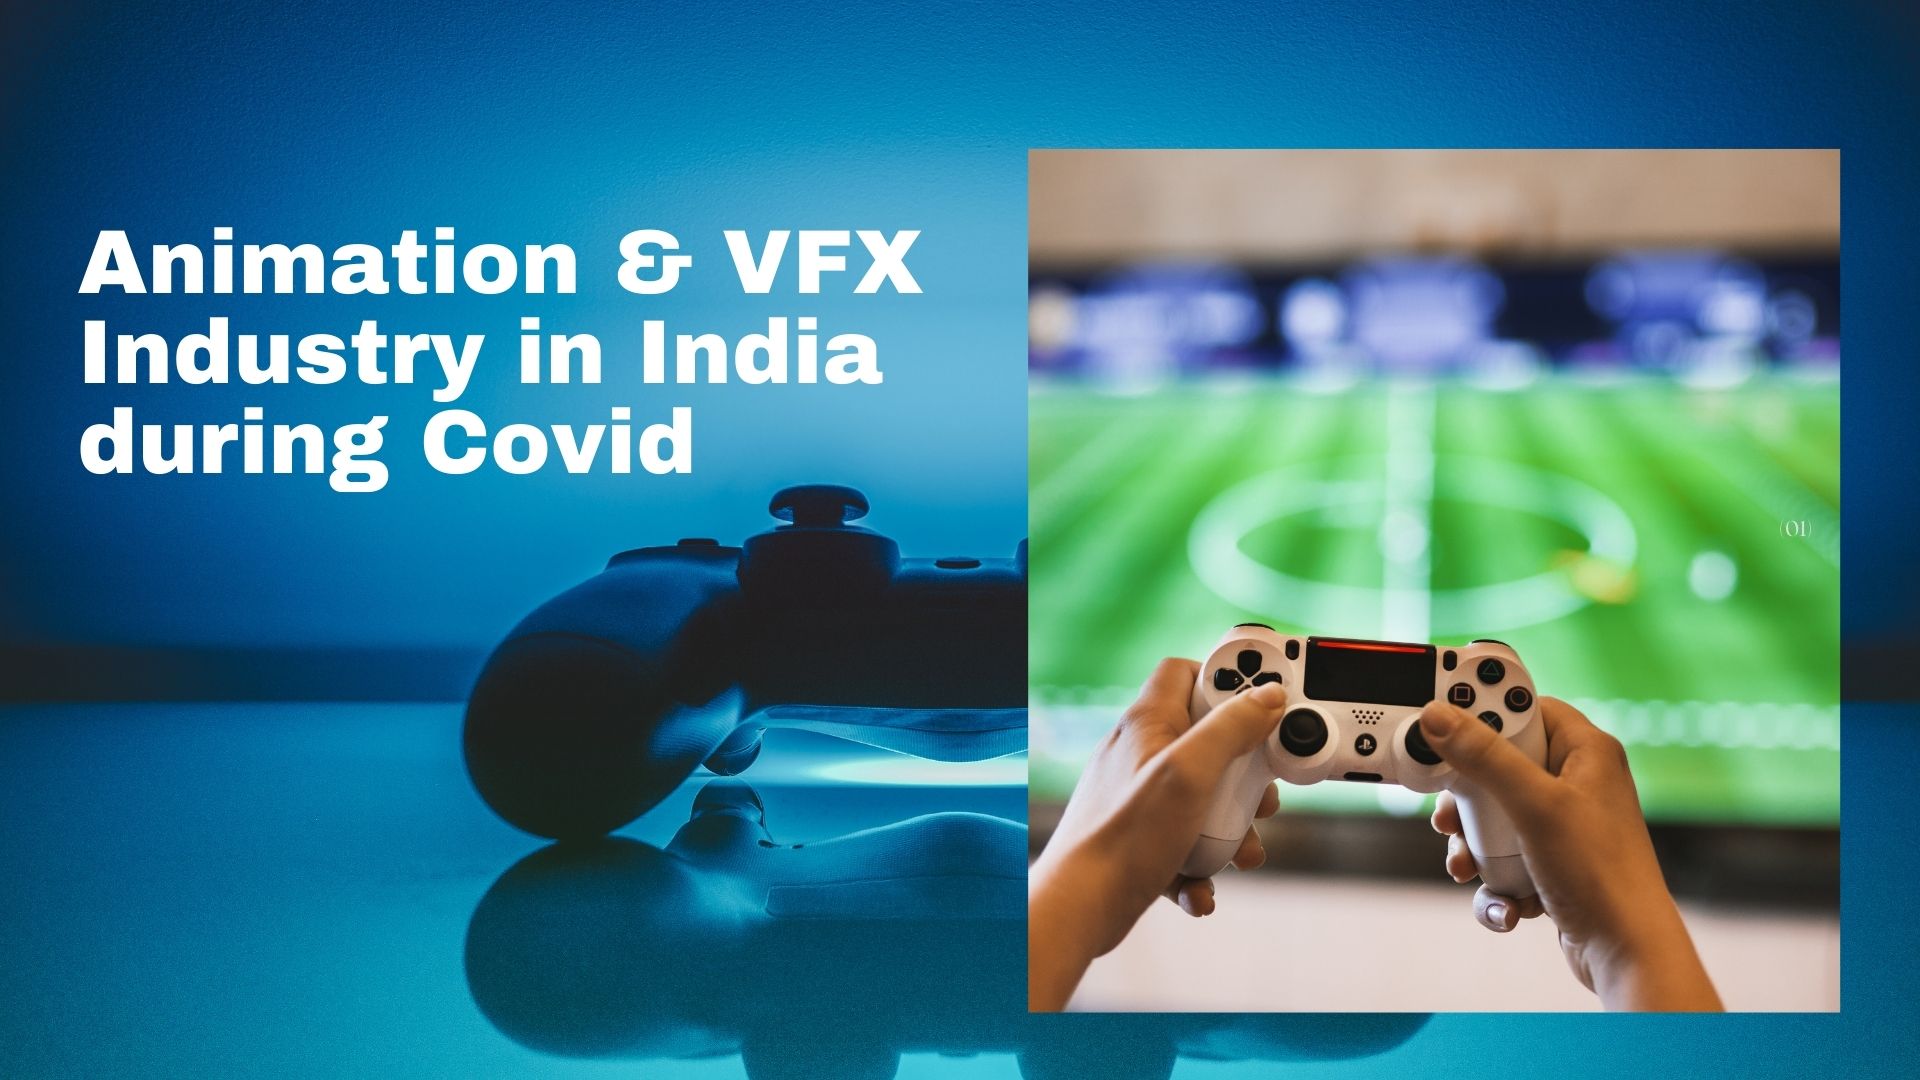 Animation & VFX Industry will see huge growth in future - FinMargin